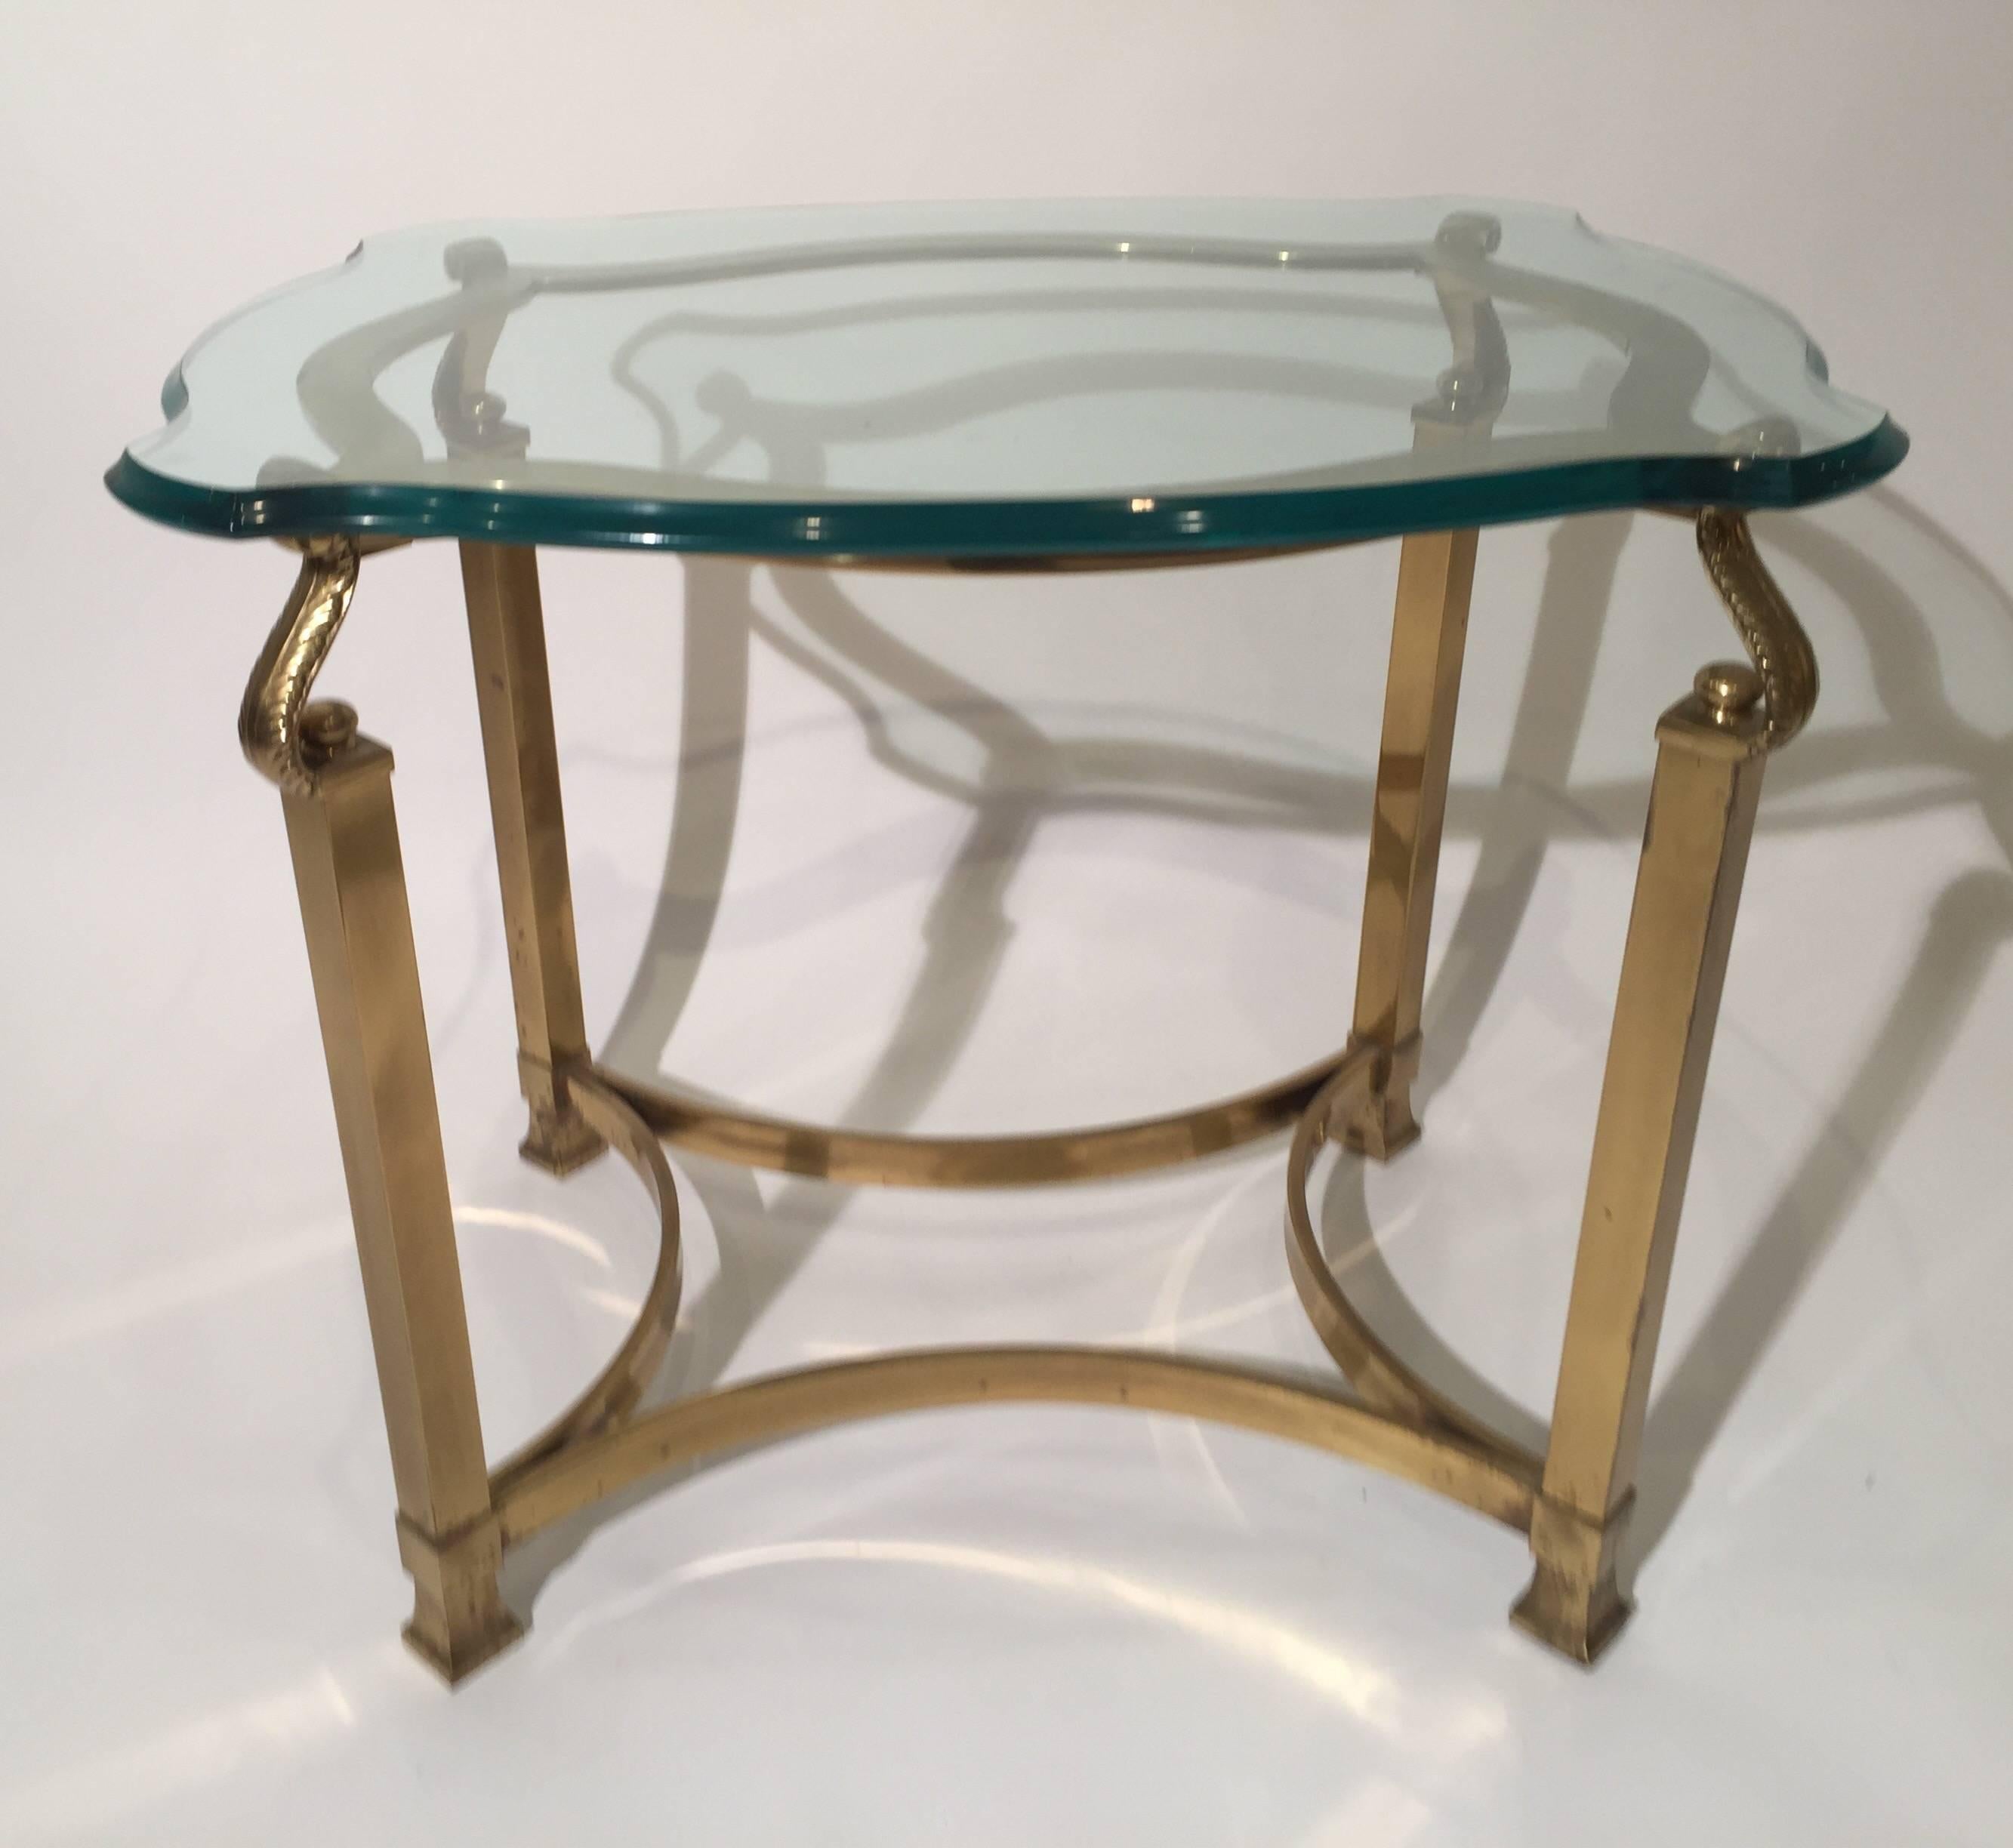 20th Century Pair of Mid-Century Modern Italian Brass and Glass Side Tables